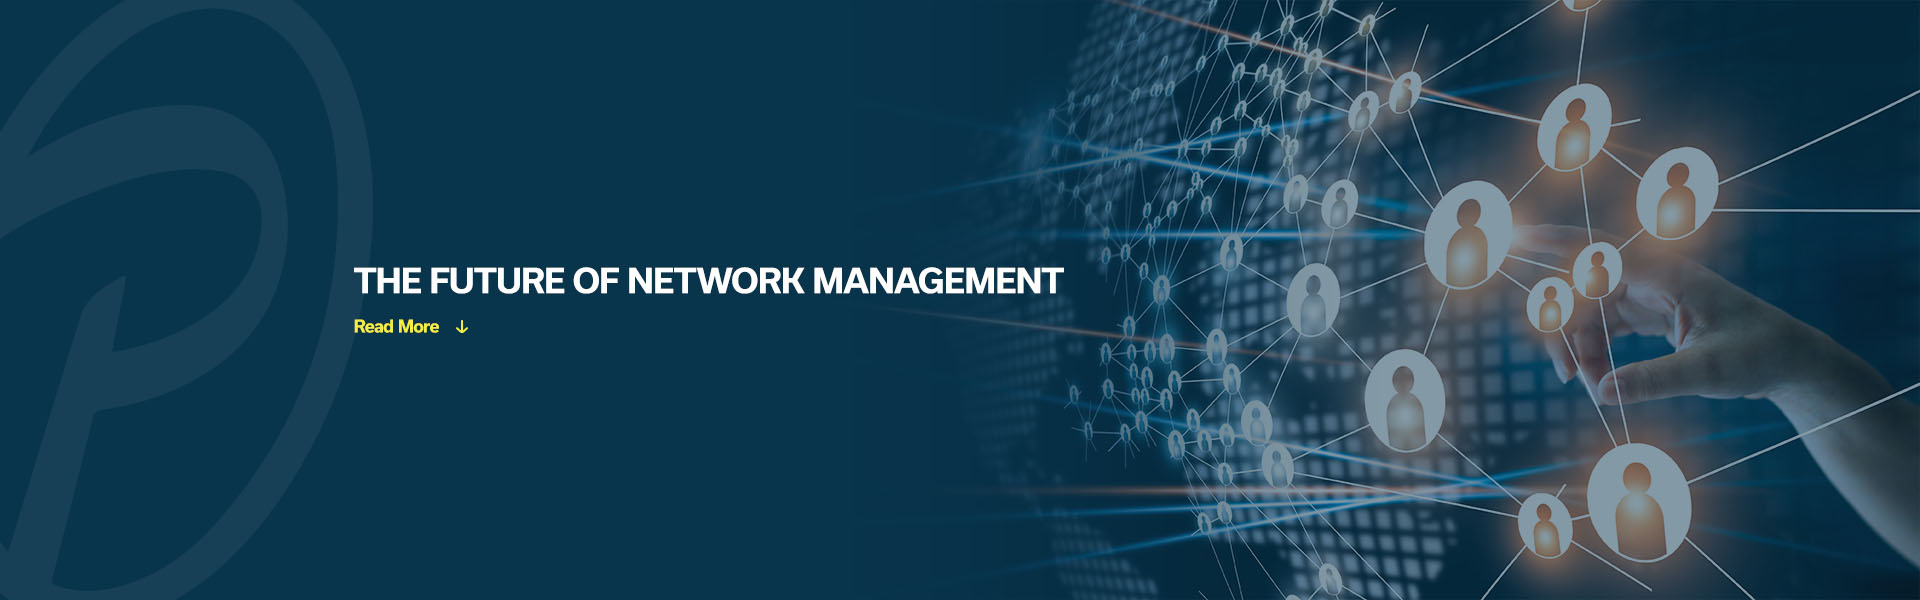 016-the-future-of-network-management